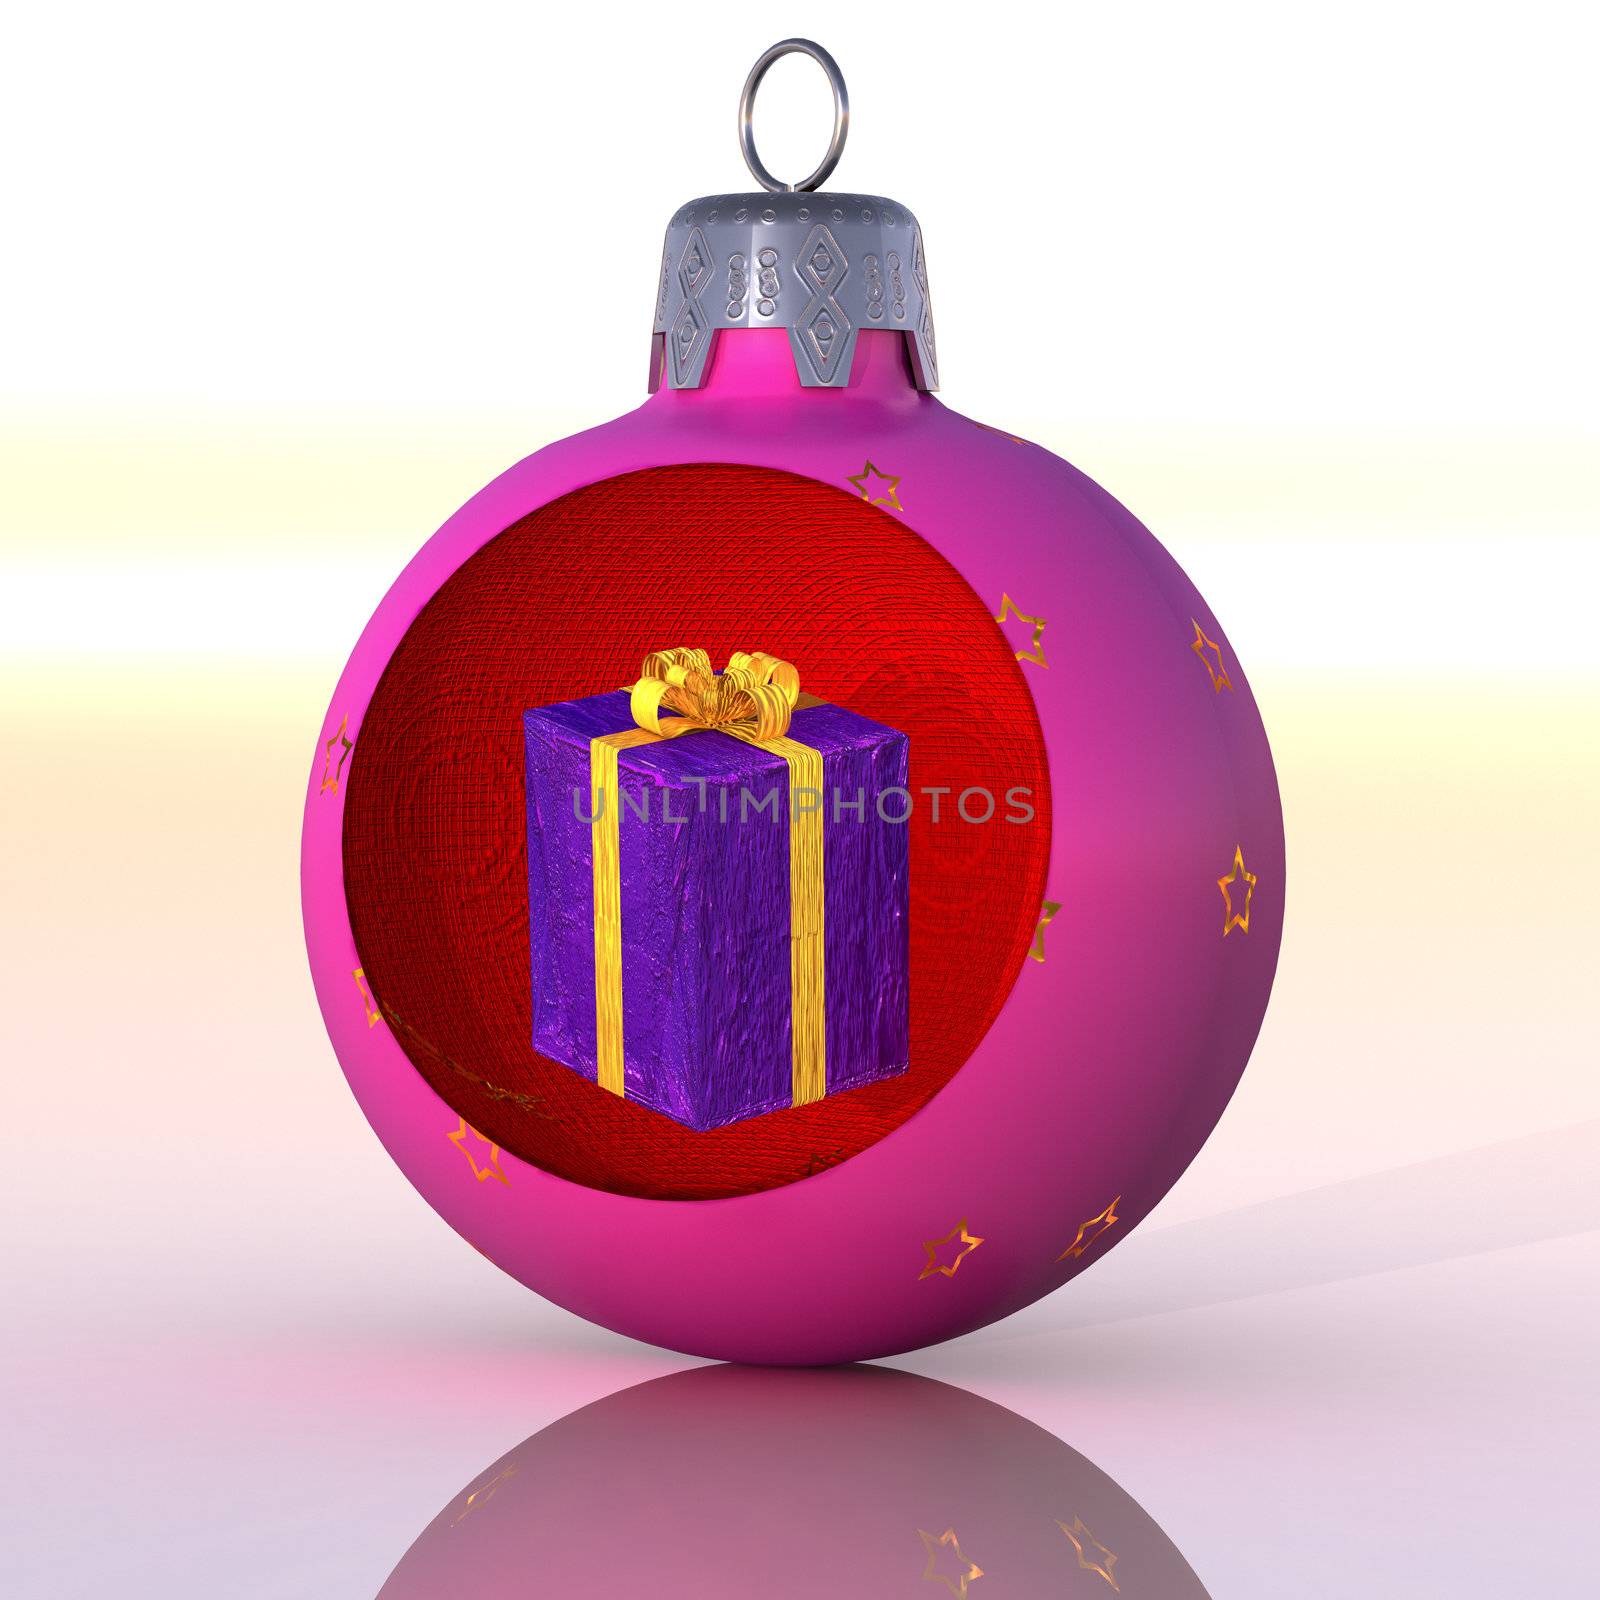 A xmas gift inside a round glass ball christmas ornament. In the spirit of giving.